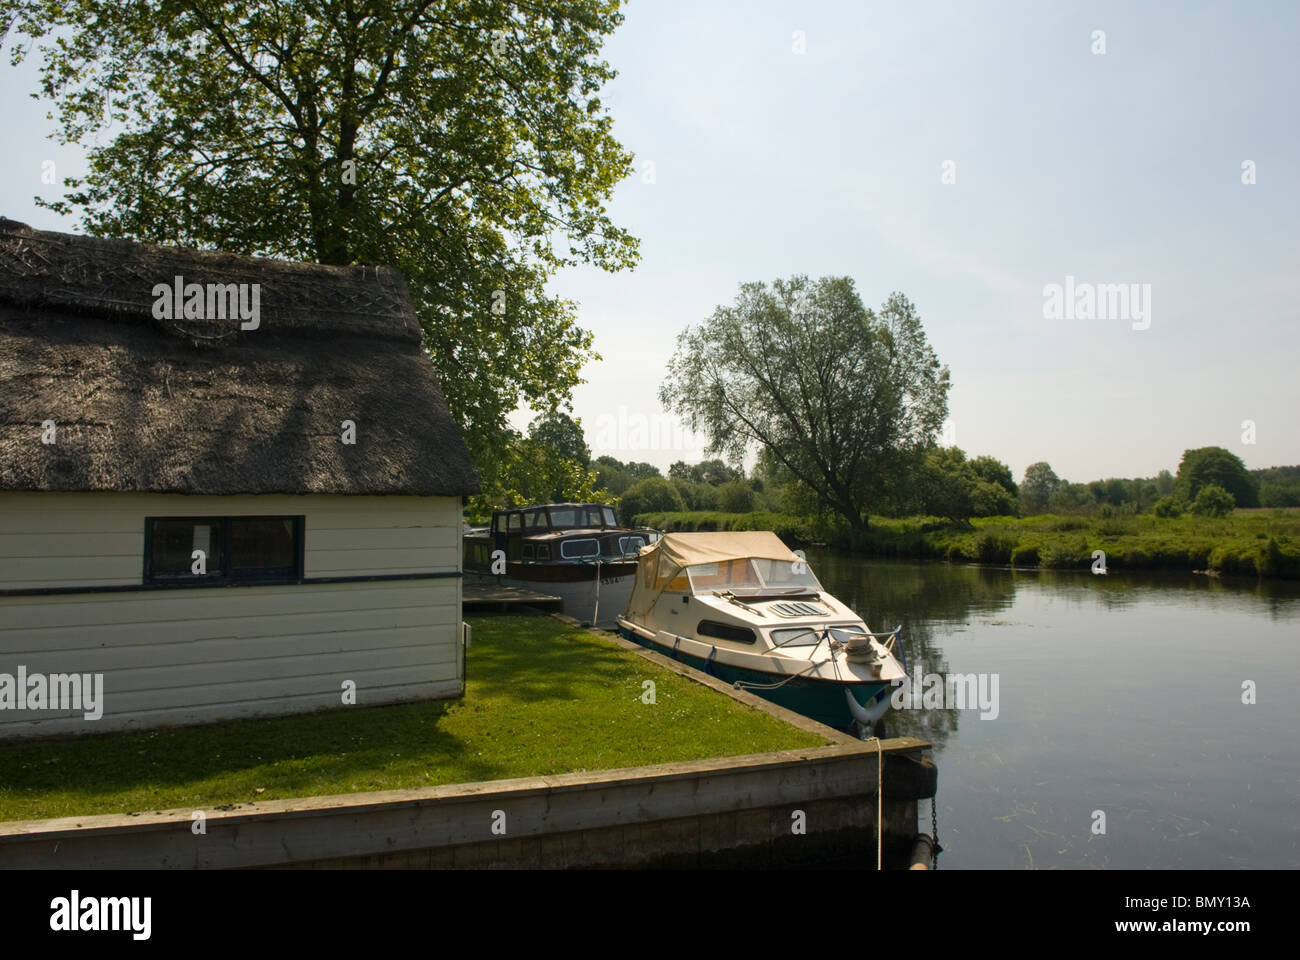 Boathouse on the River Bure at Coltishall, Norfolk, England. Stock Photo